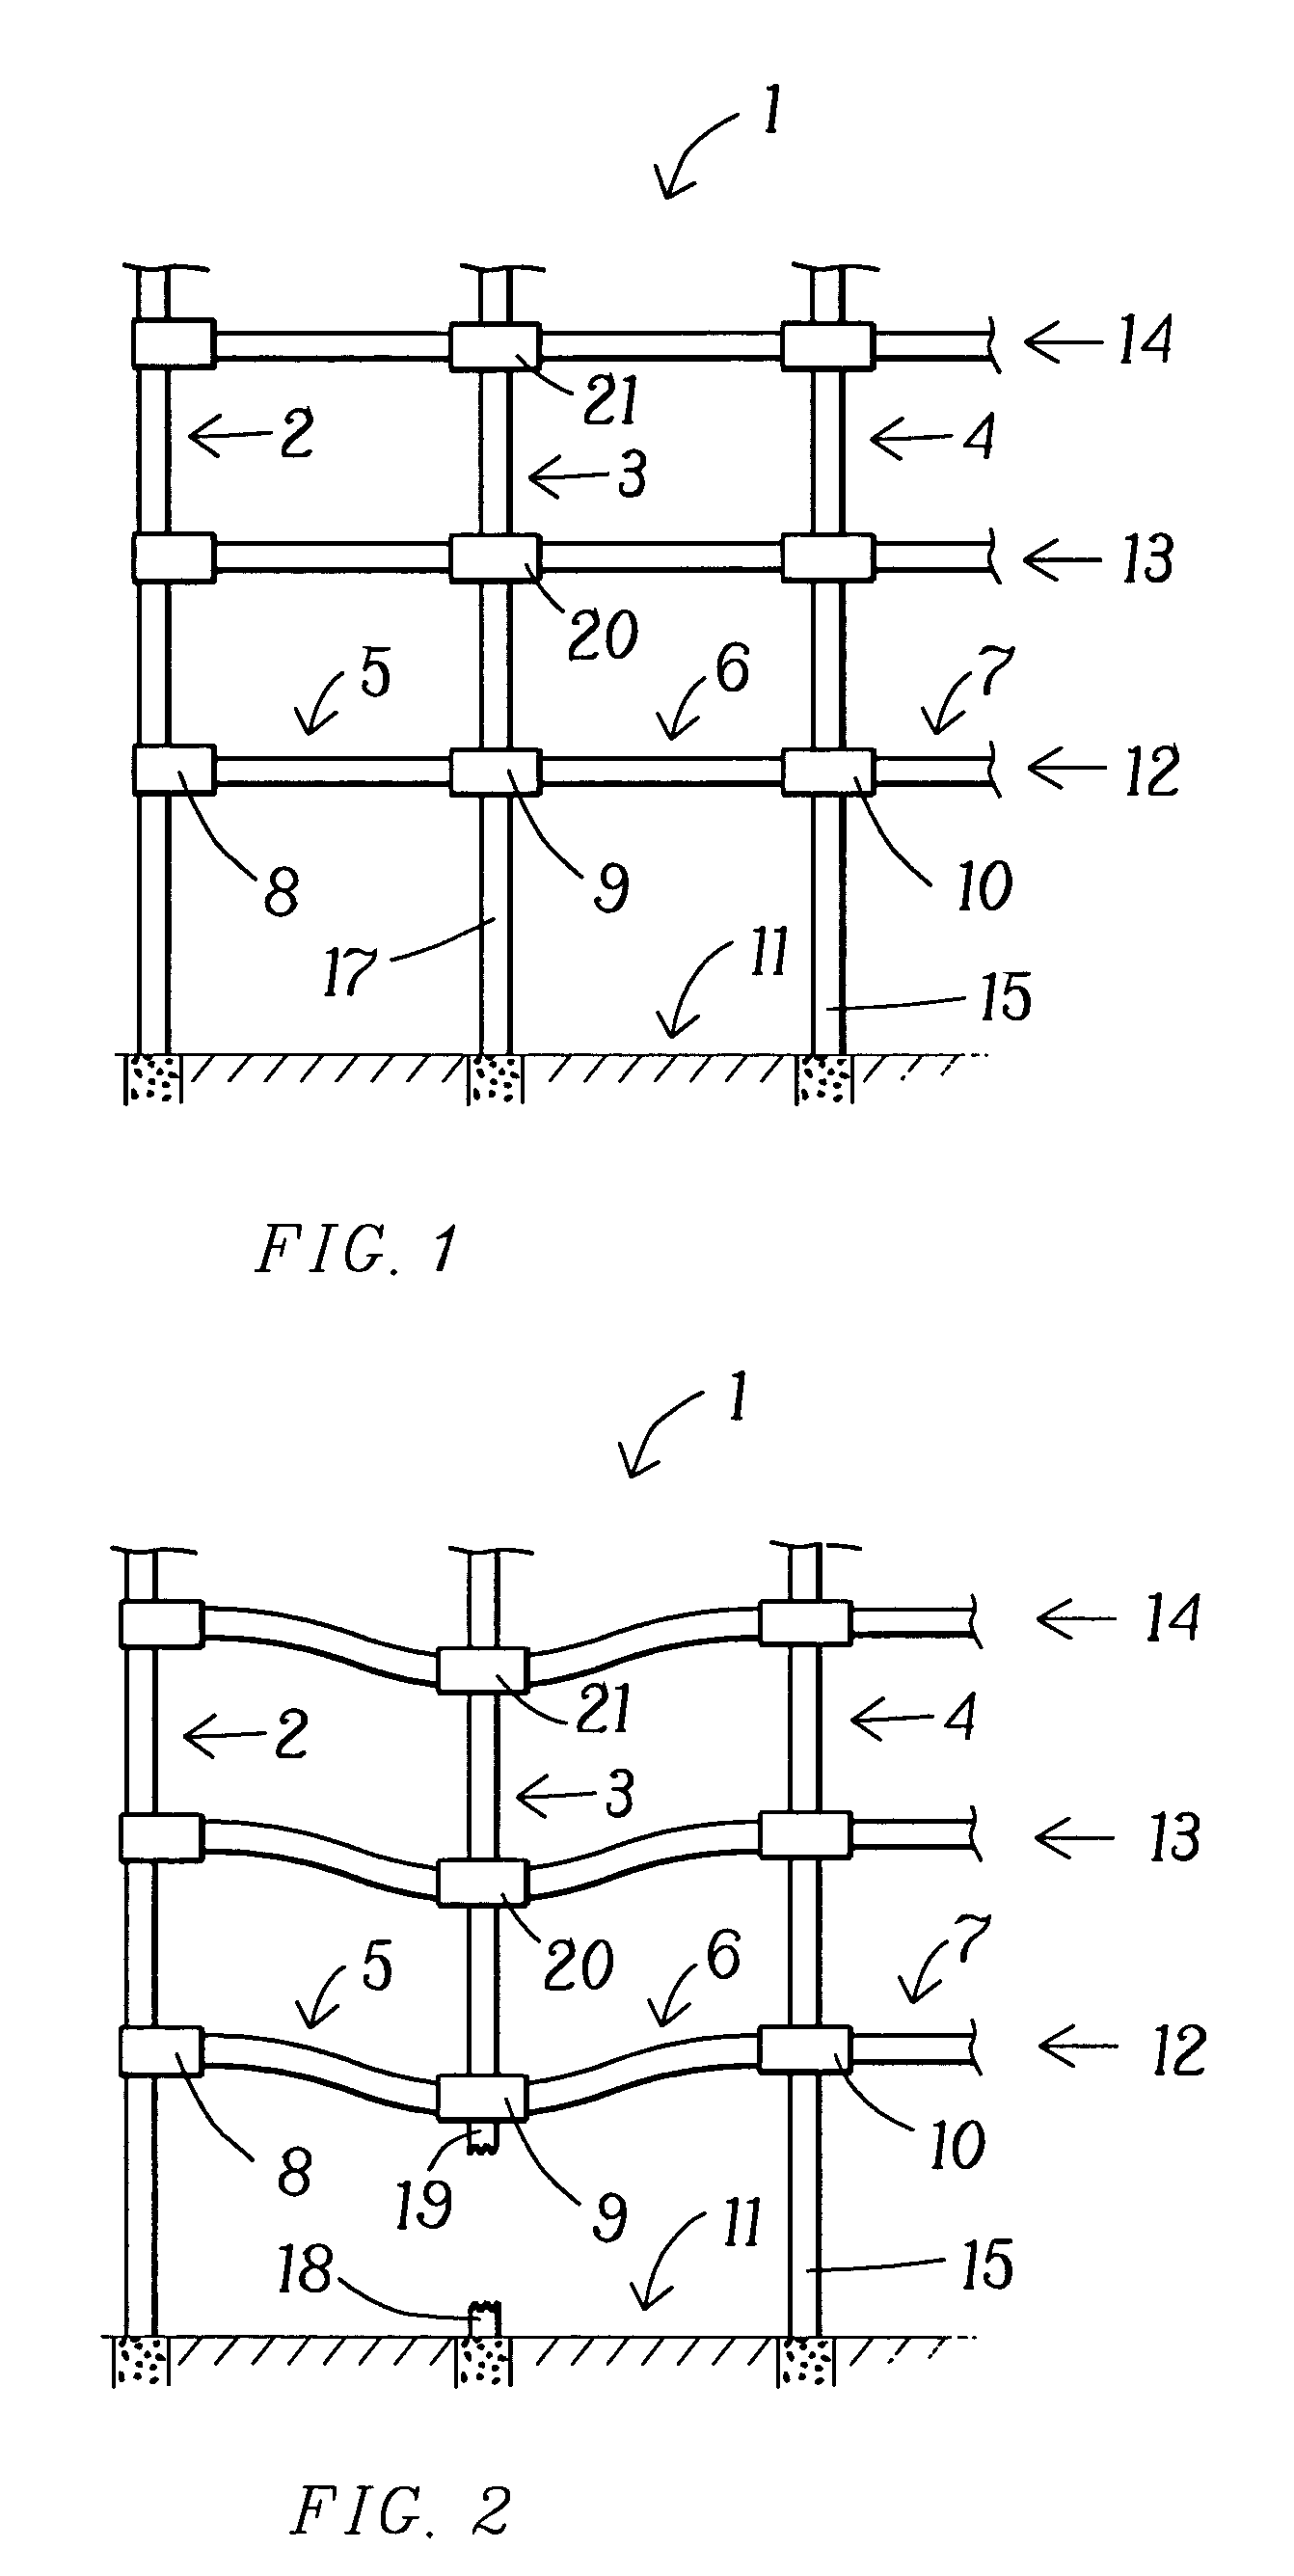 Structural joint connection providing blast resistance and a beam-to-beam connection resistant to moments, tension and torsion across a column